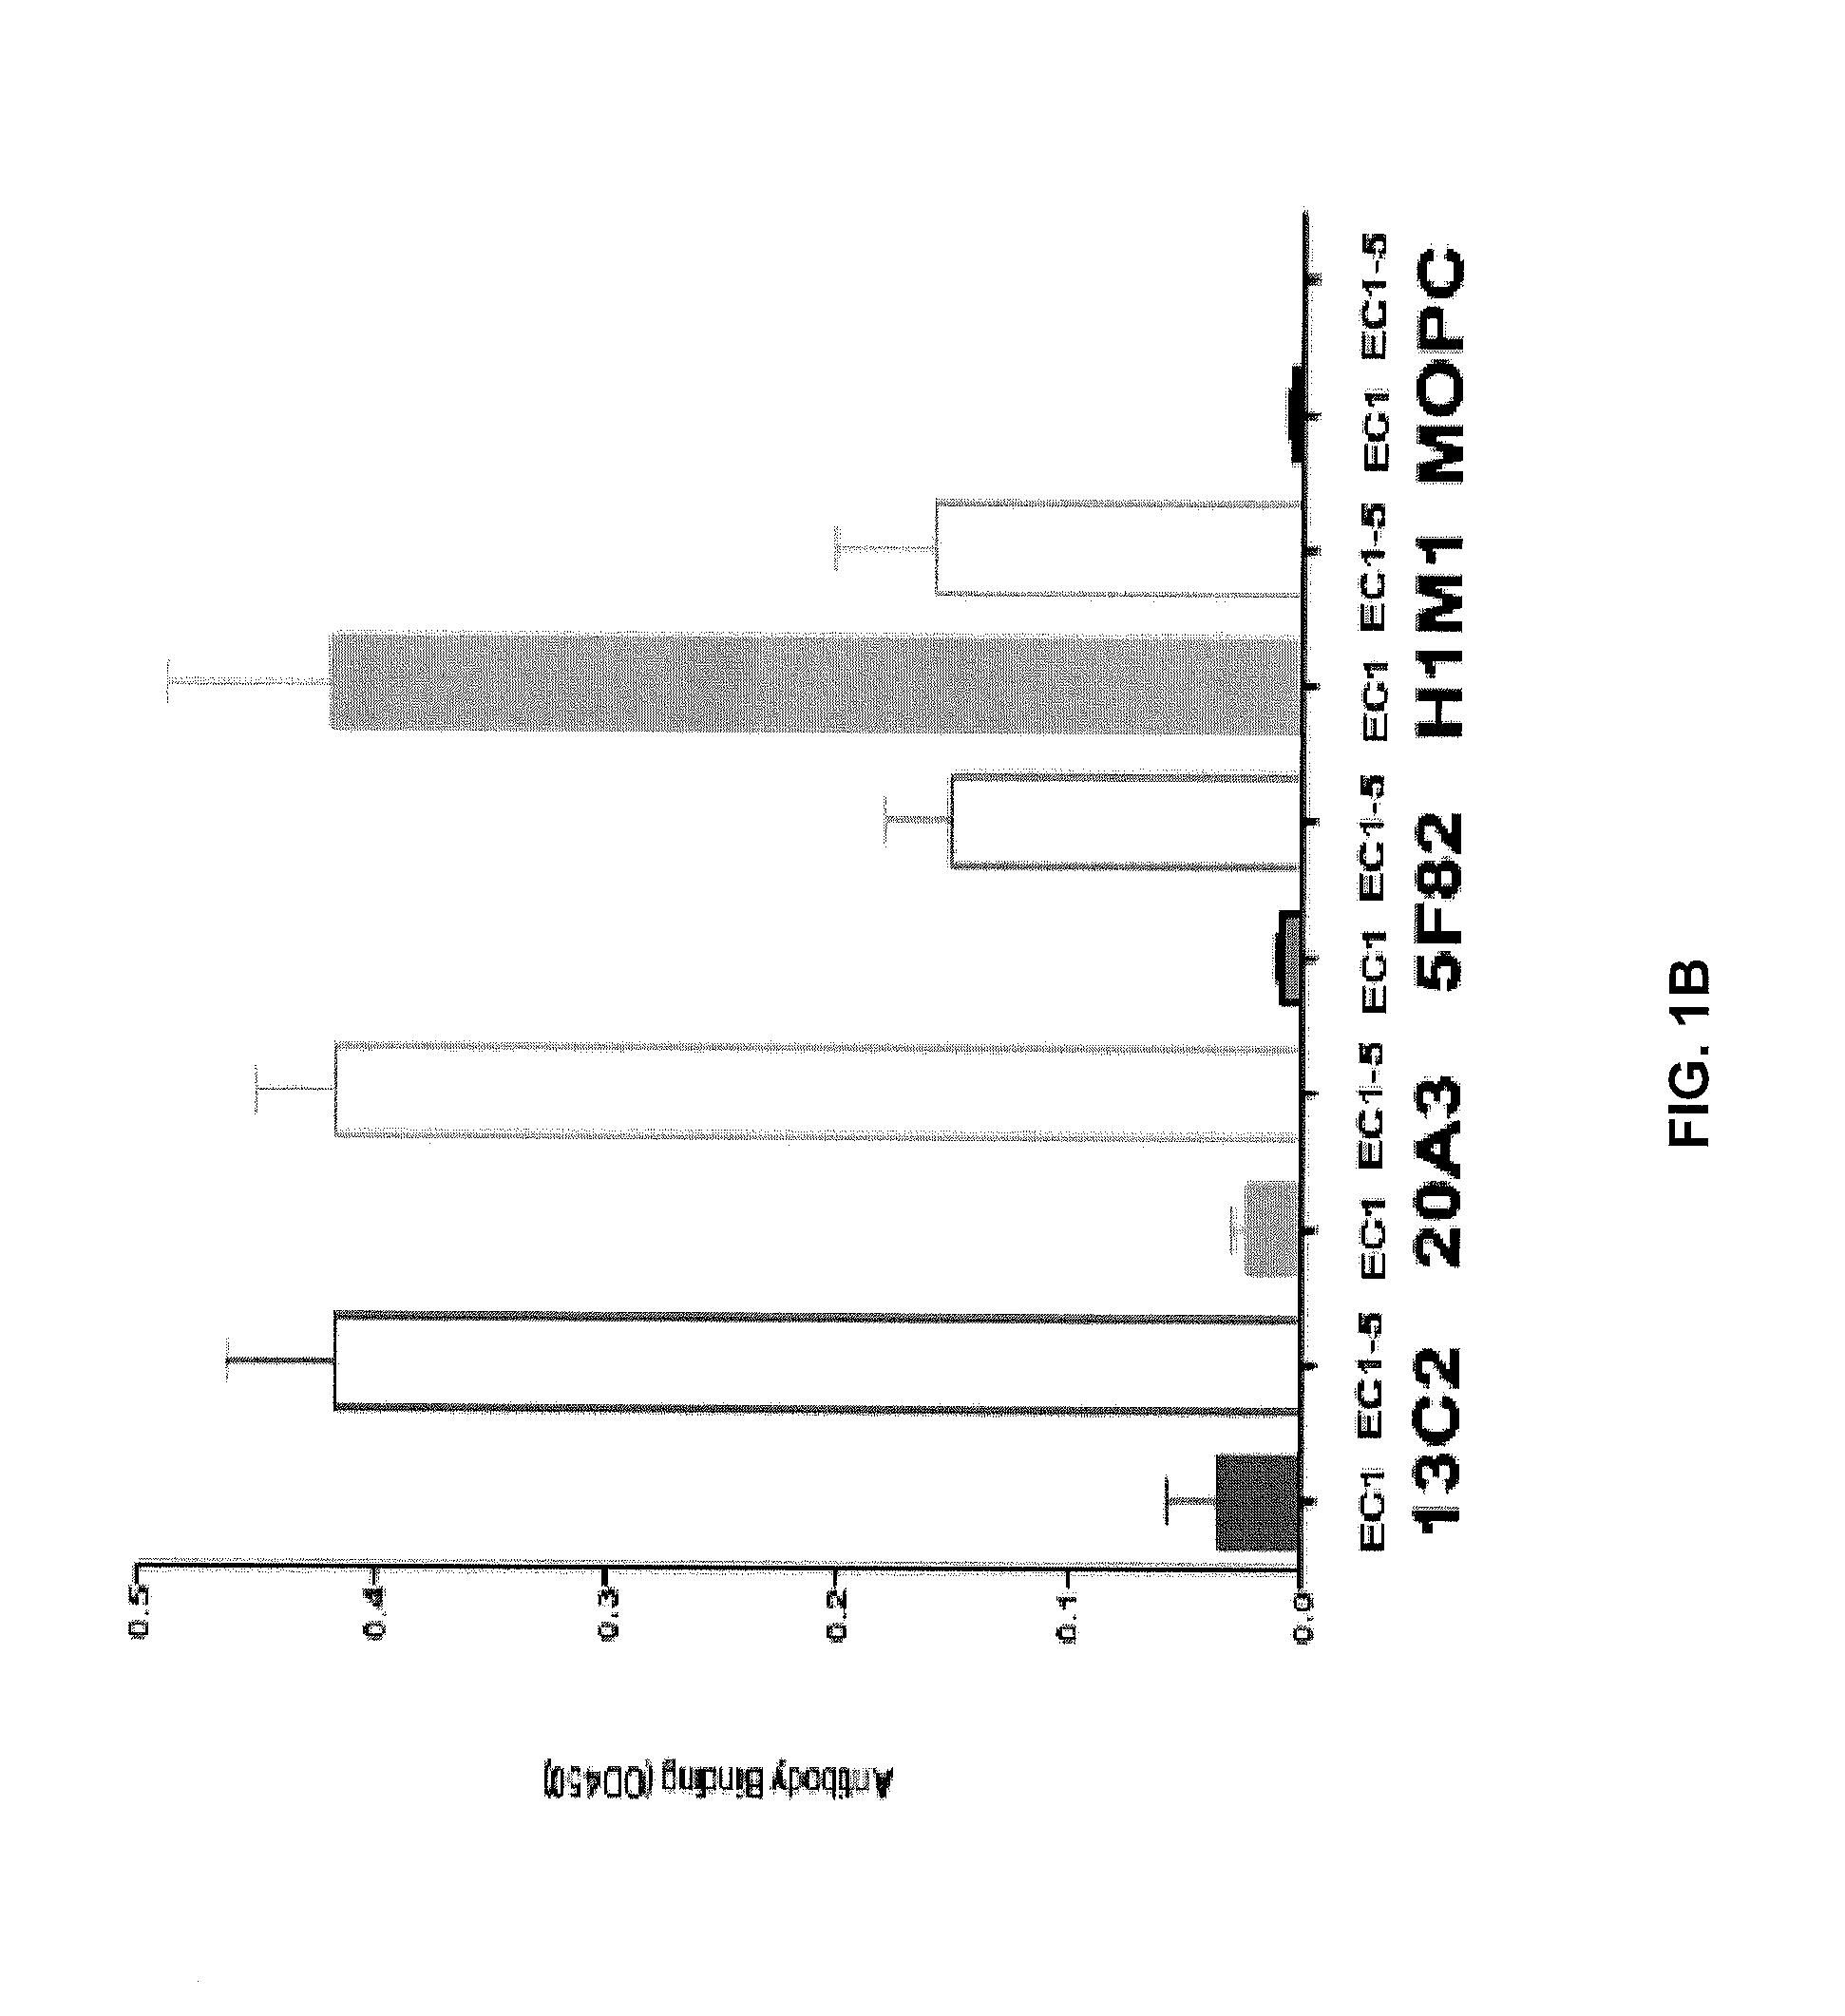 Humanized antibodies targeting the ec1 domain of cadherin-11 and related compositions and methods